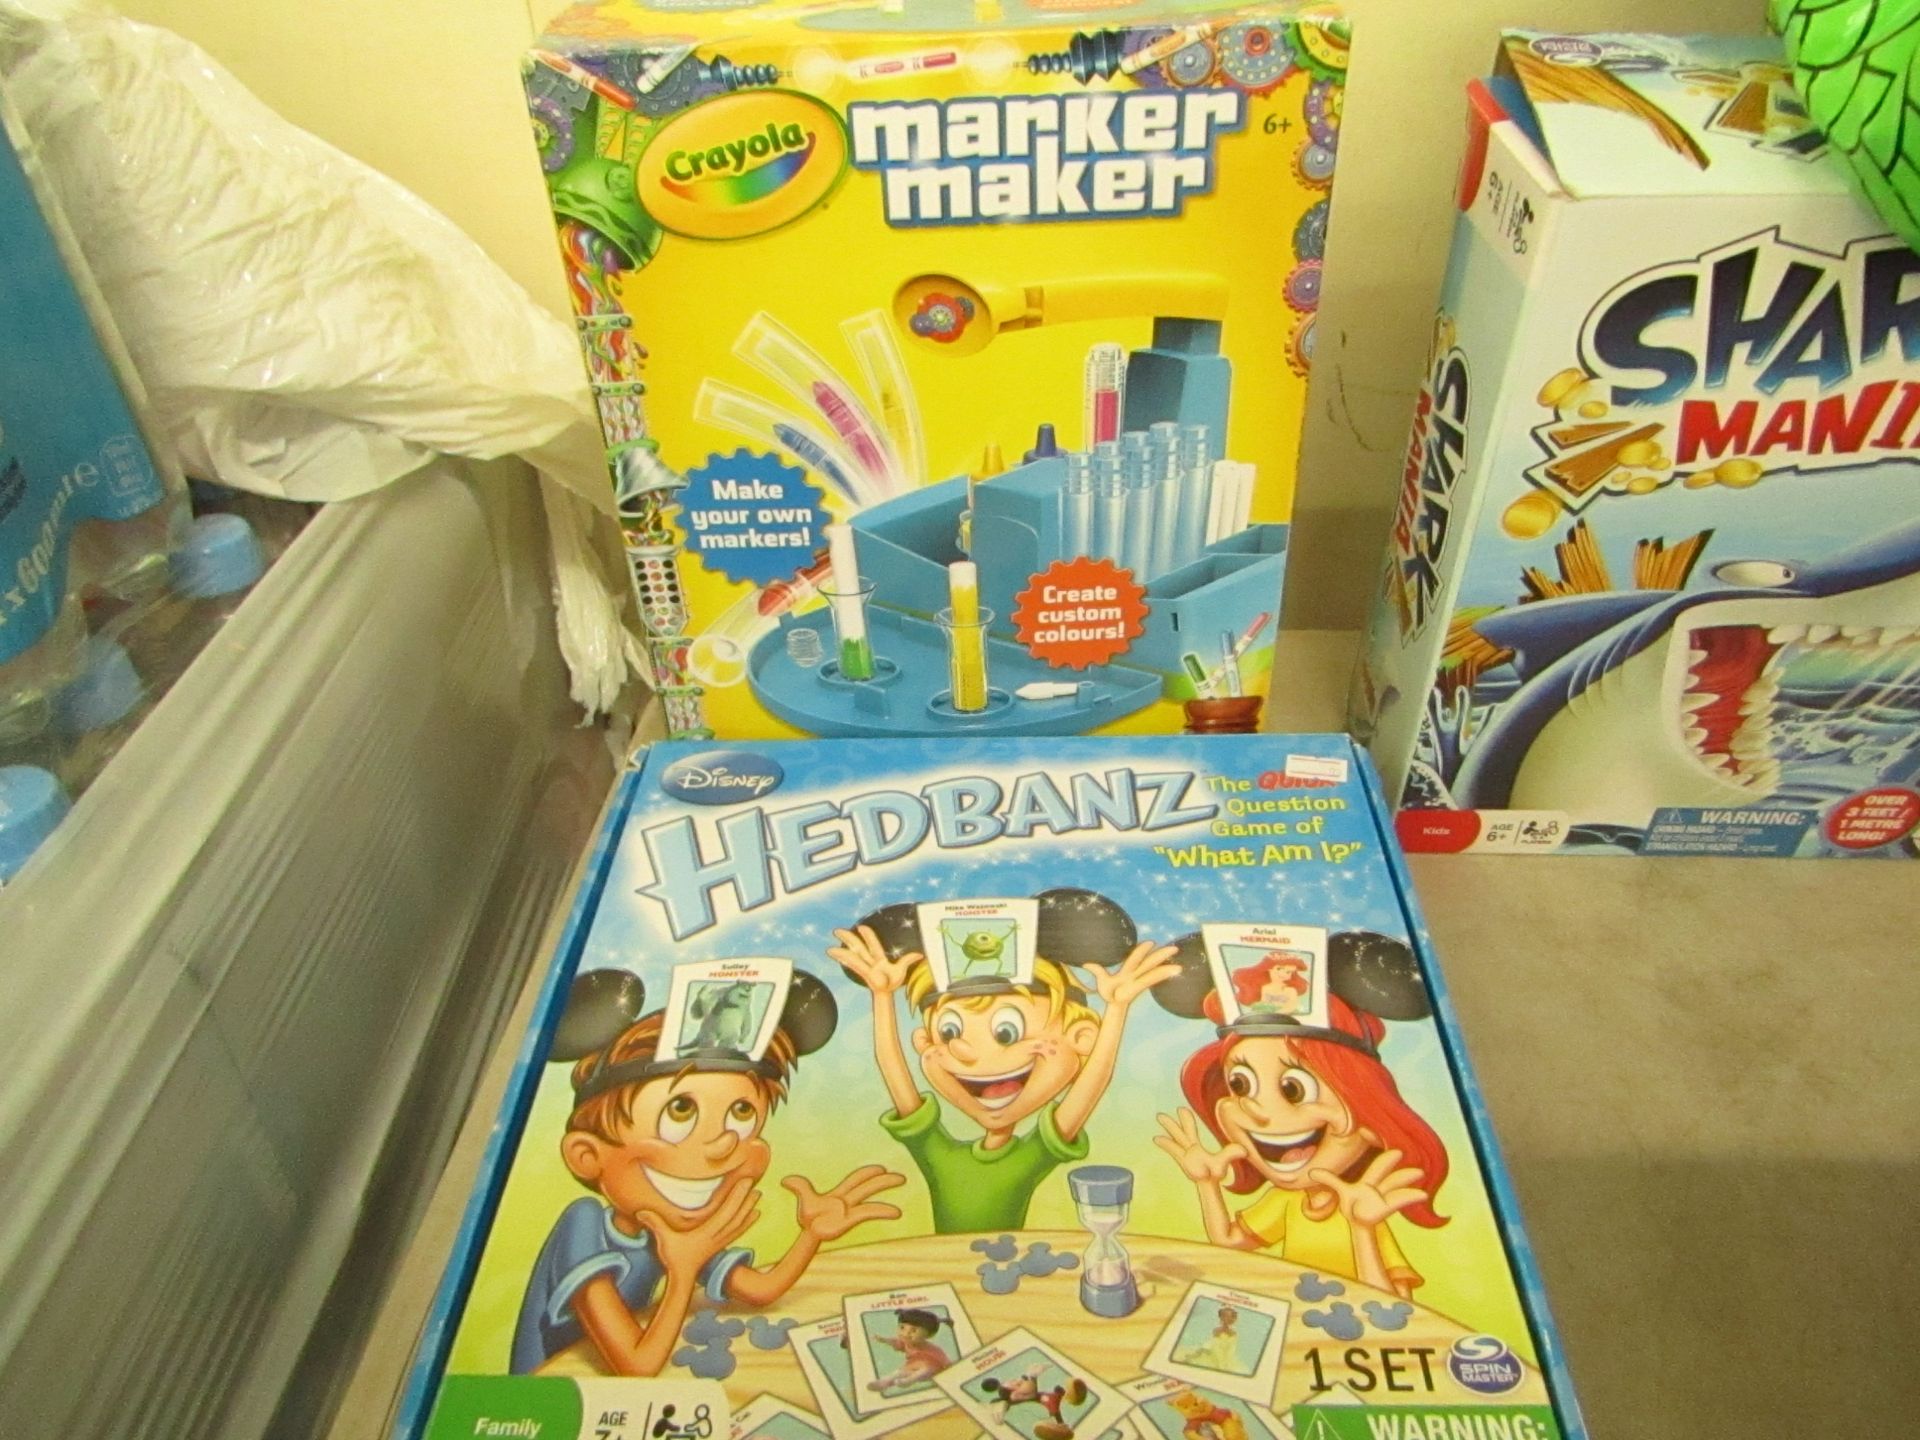 2 x Items Being 1 x Disney Headbands game and 1 x Crayola Marker Maker, Boxed and unchecked